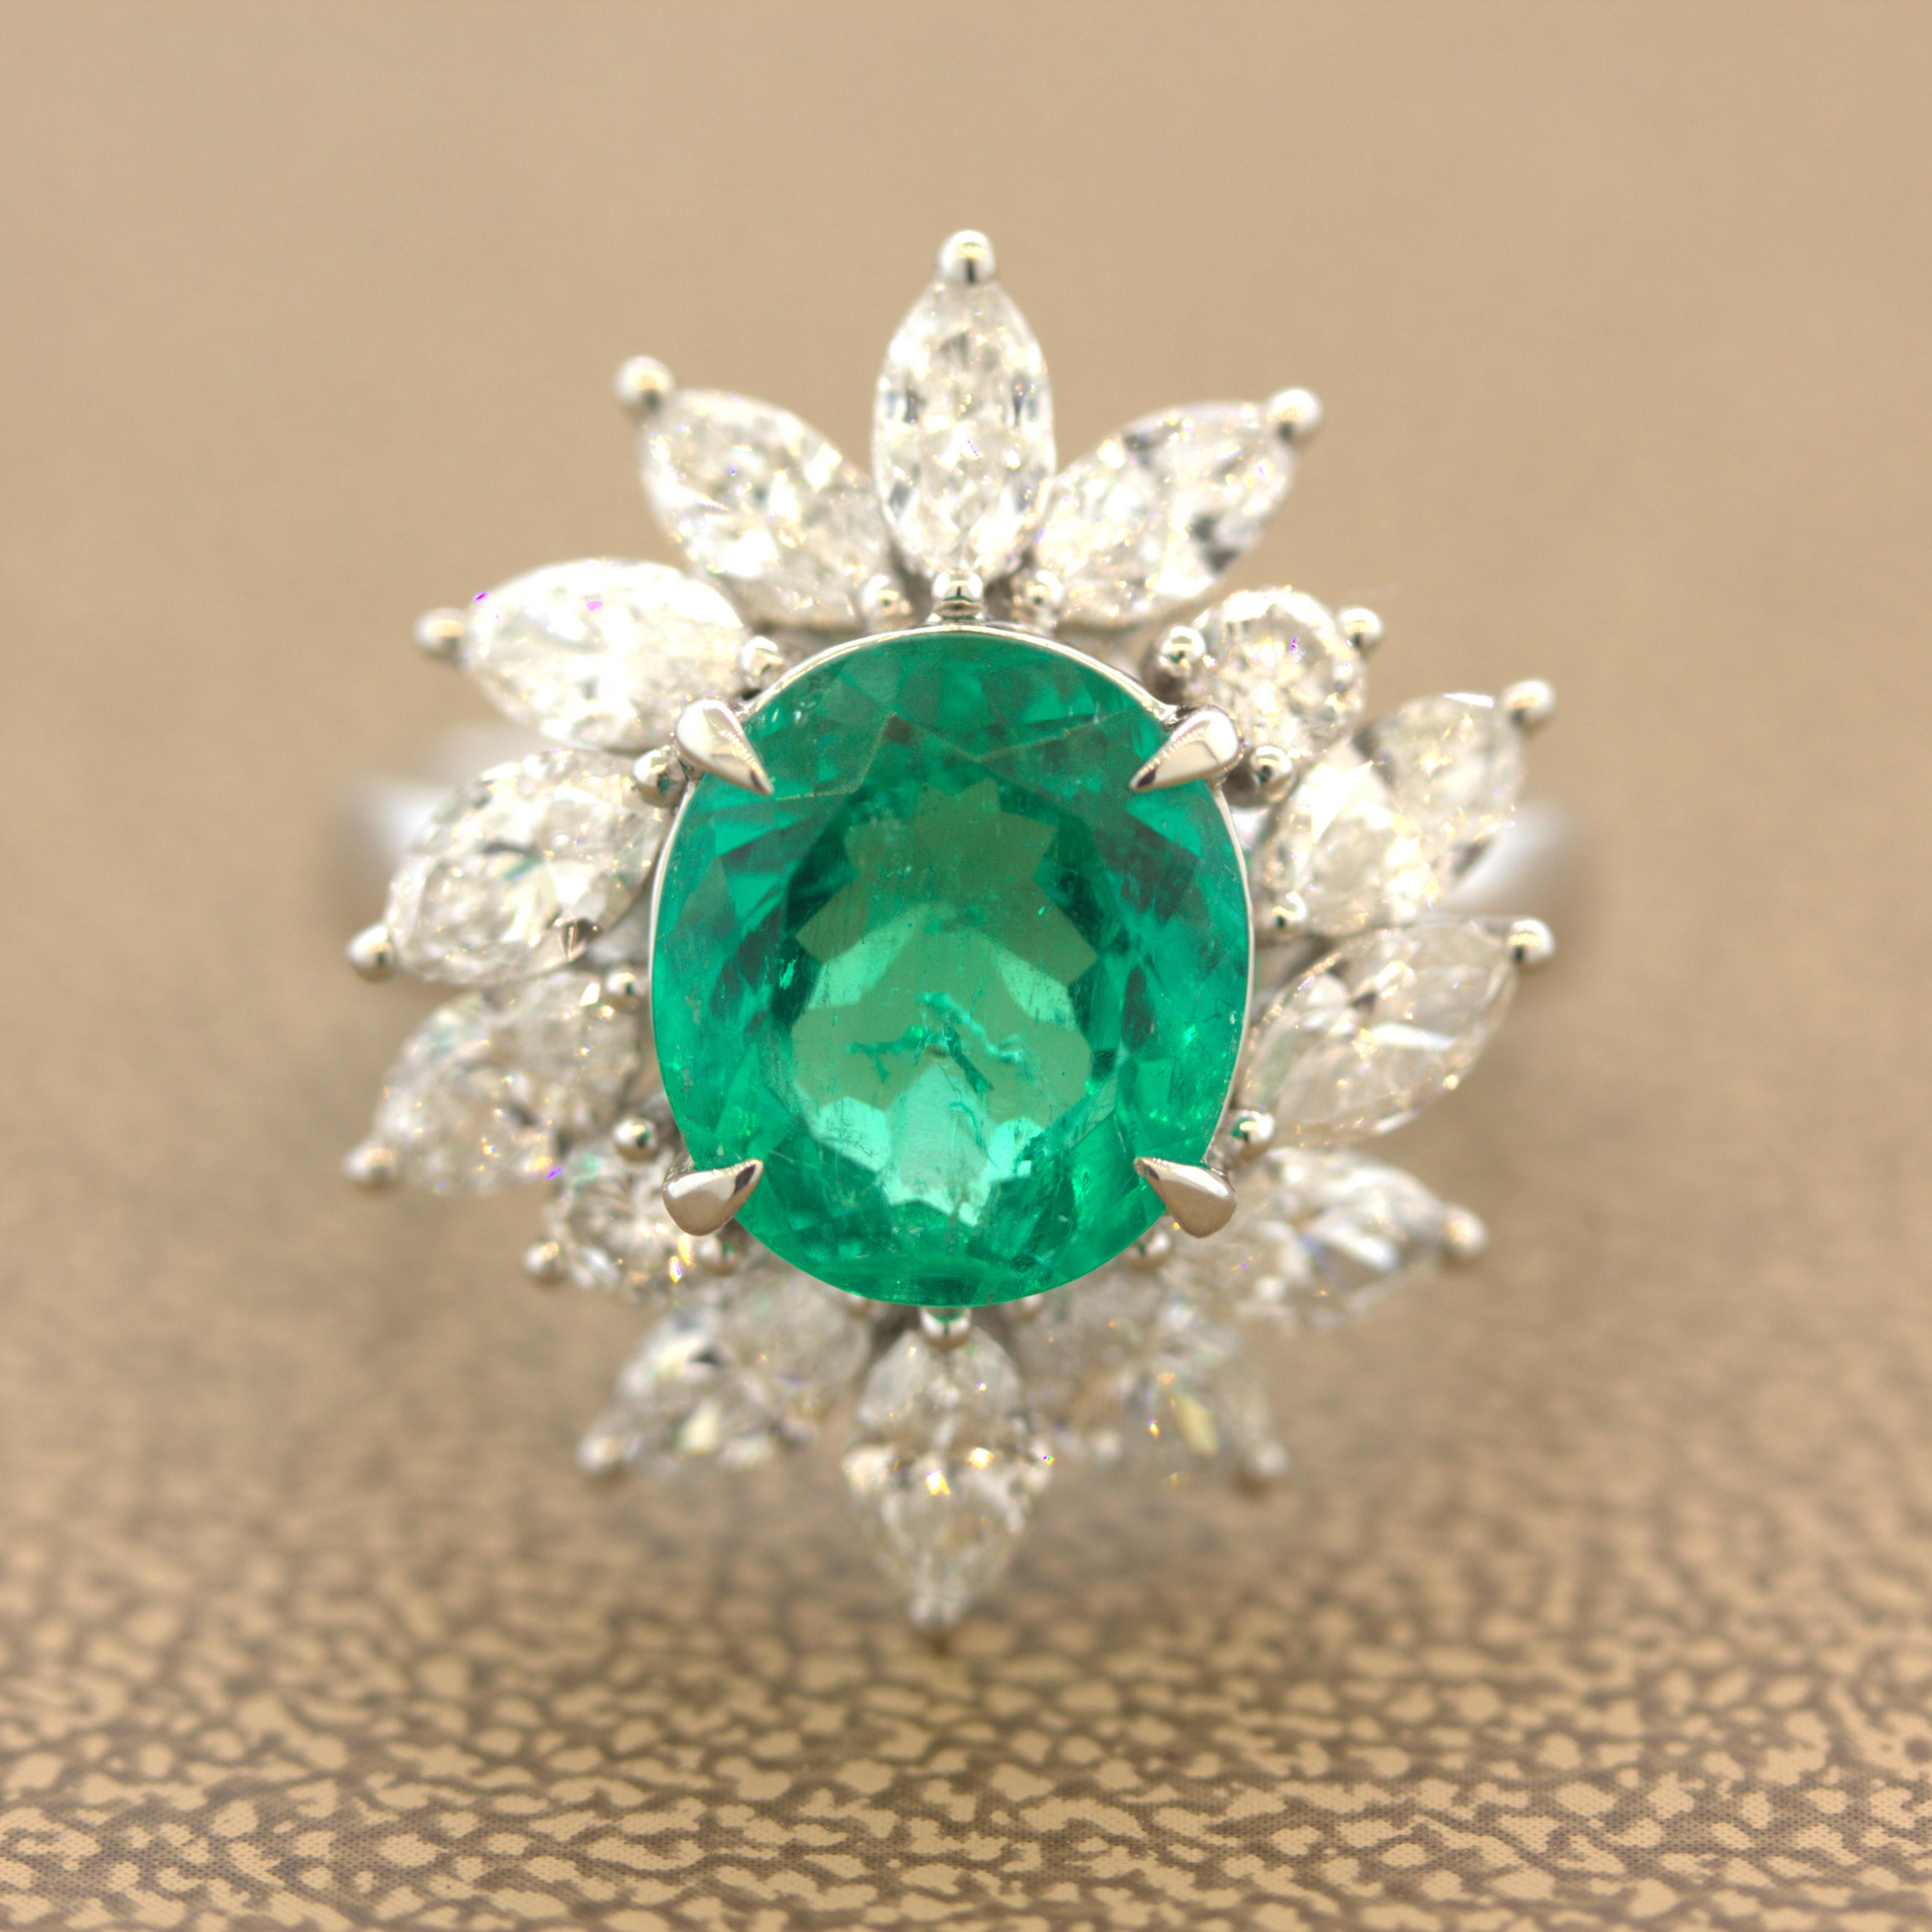 A fine and sweet emerald weighing 2.91 carats takes center stage of this classic platinum ring. The emerald has a lovely oval shape along with a bright rich pure green color that is so pleasing to the eye. It is complemented by a halo of large